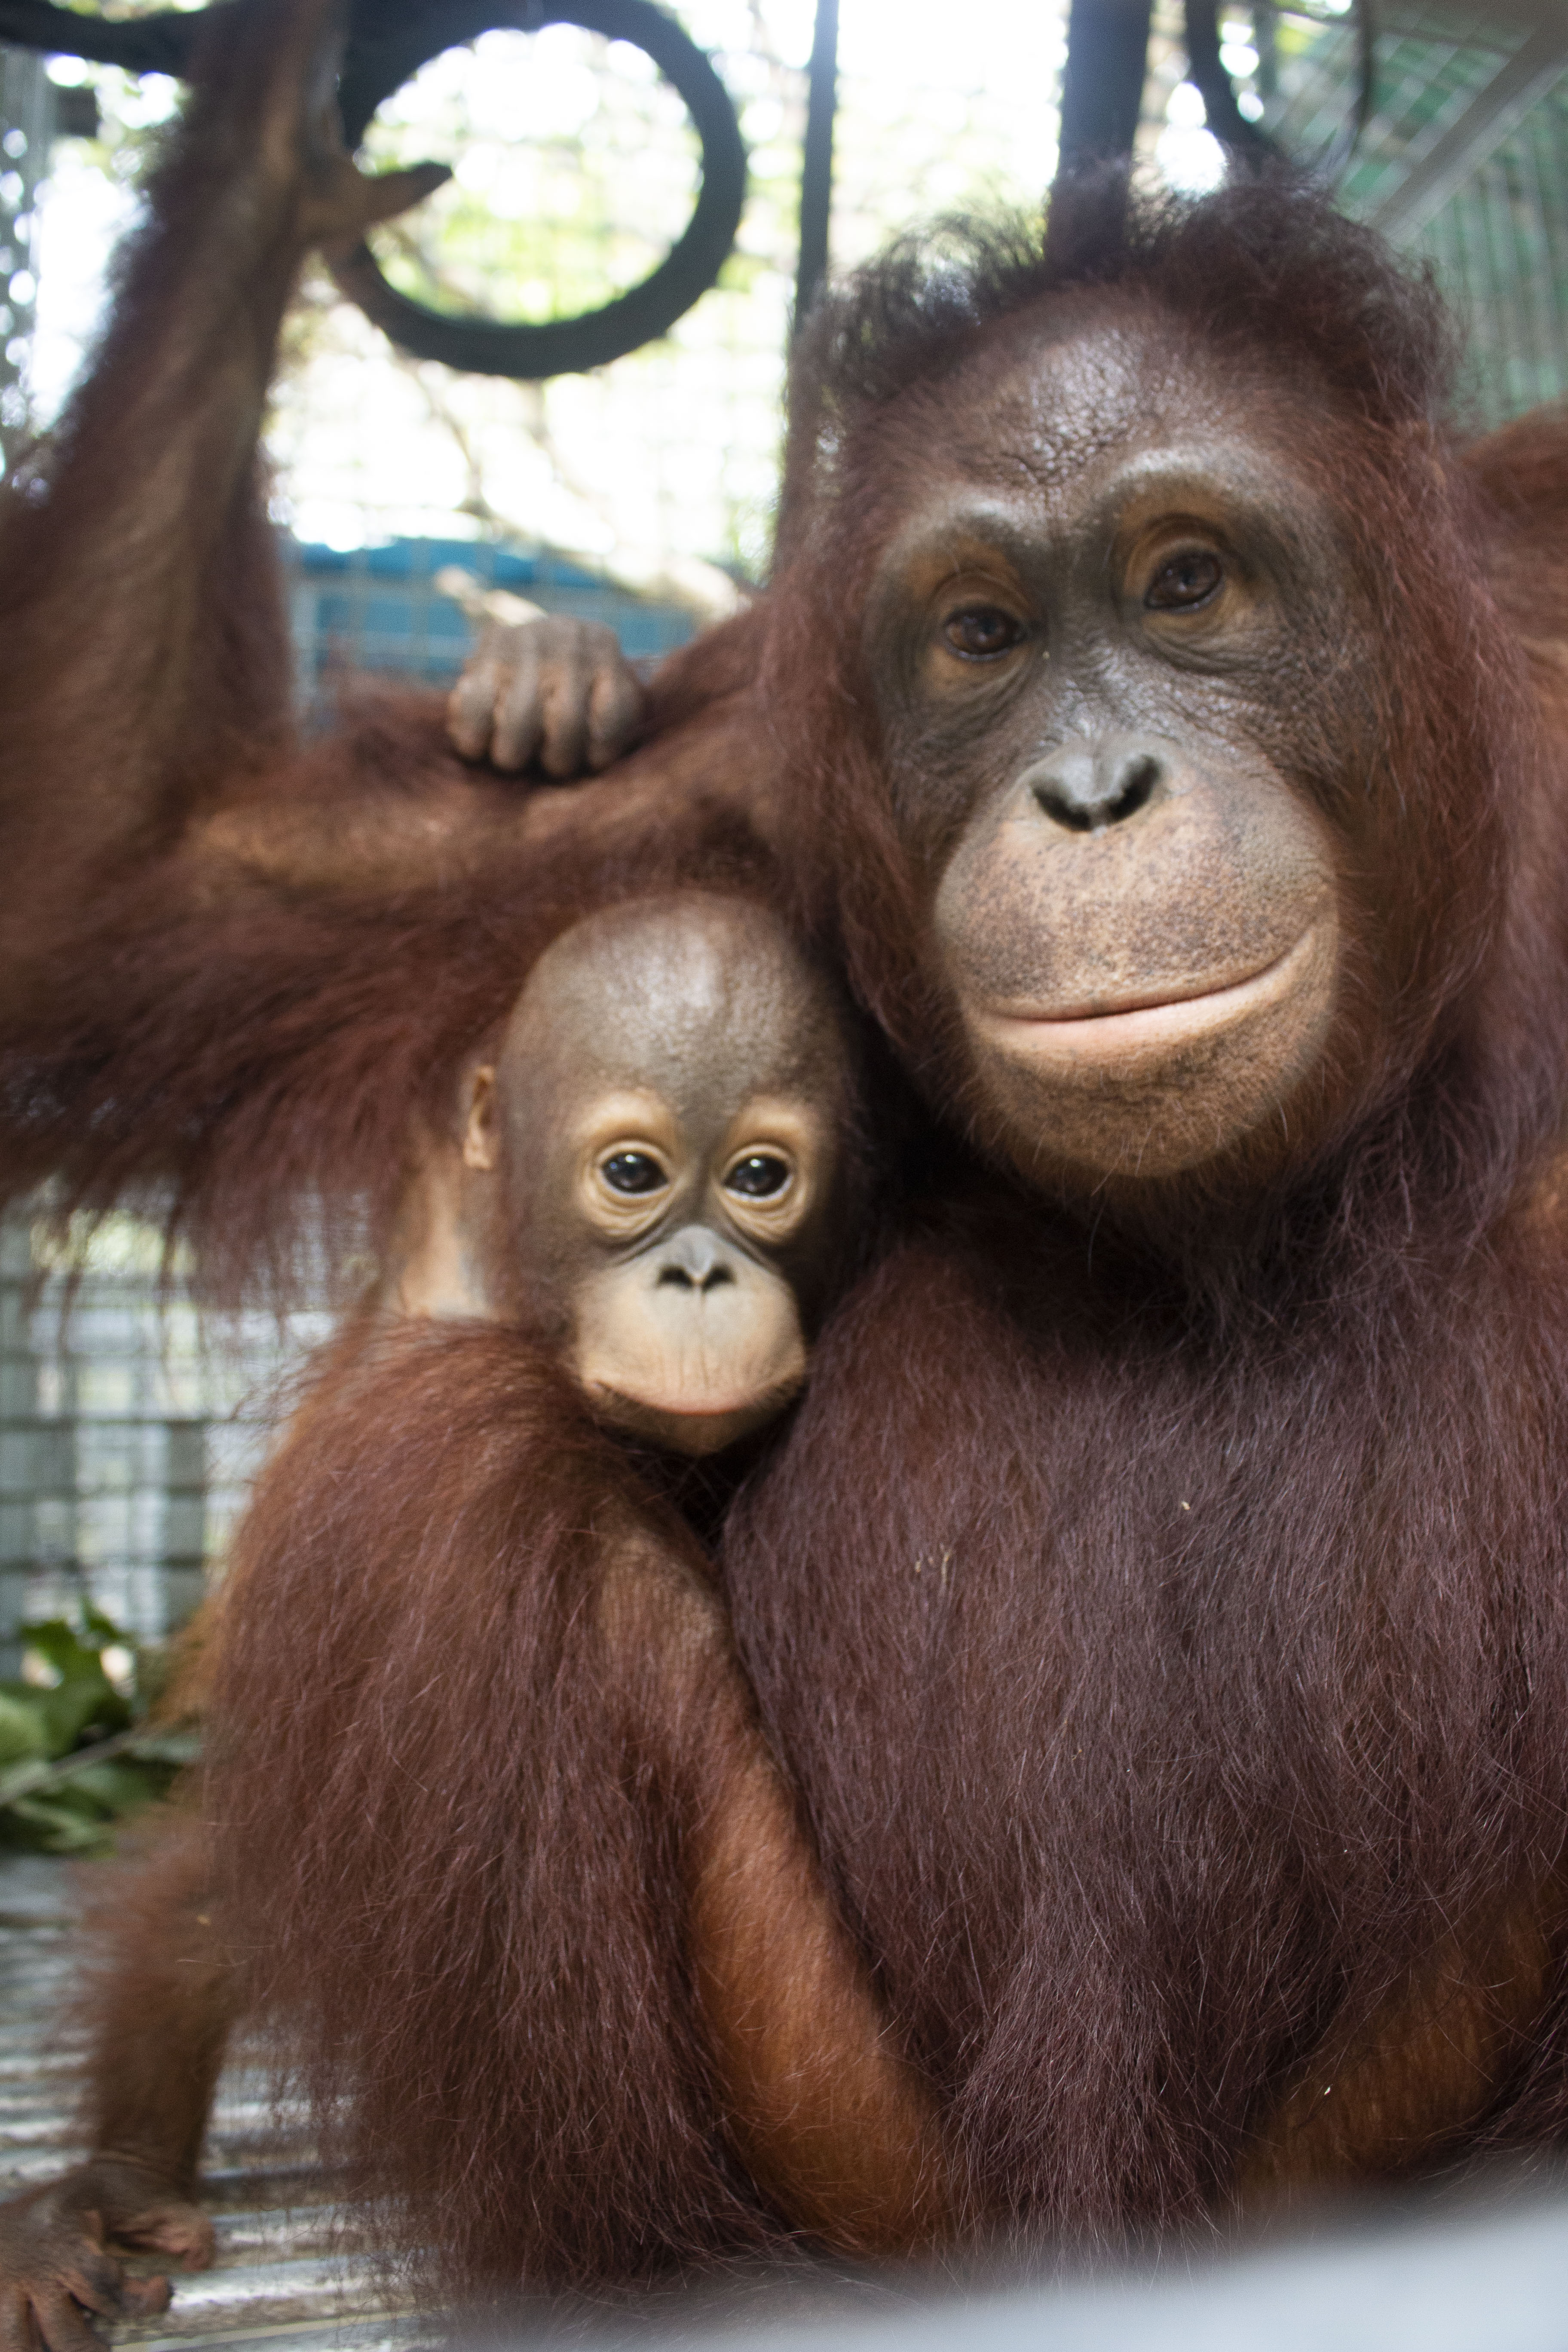 The two orangutans looking into camera